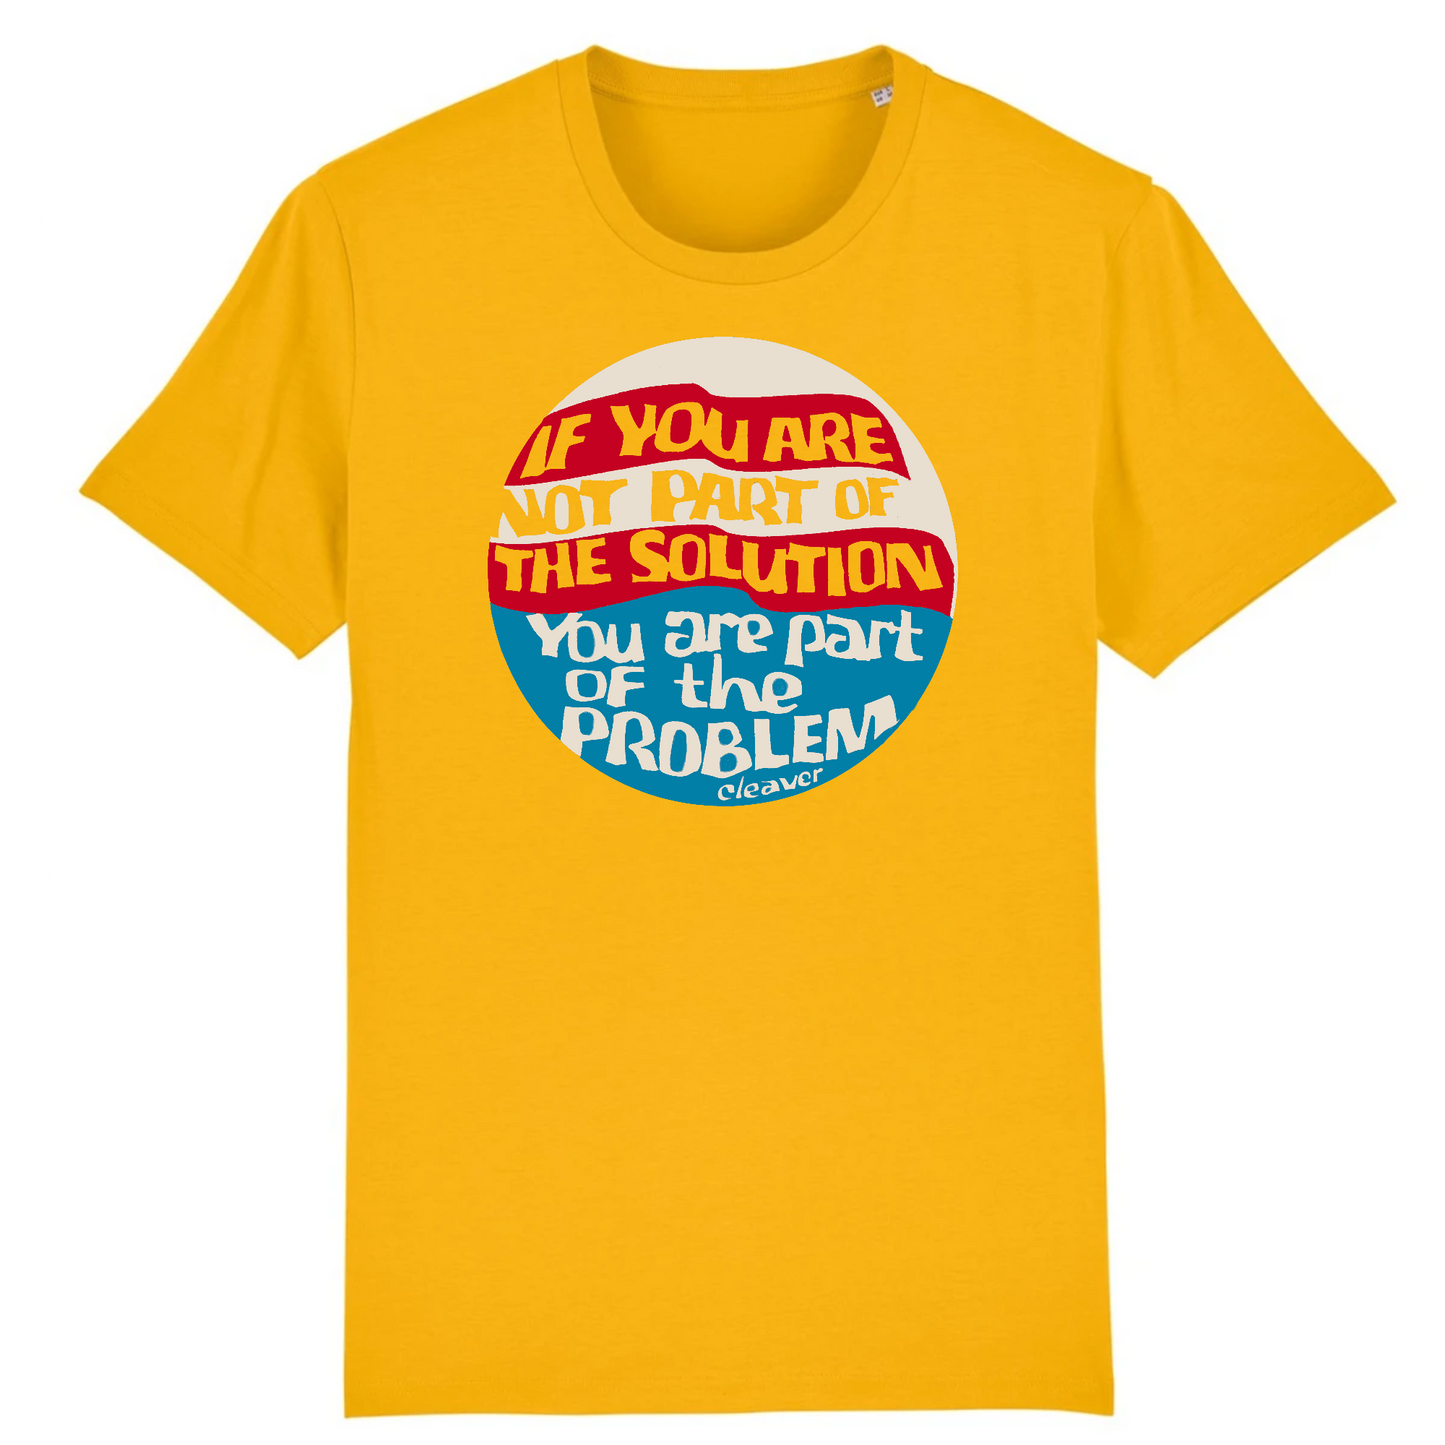 If You Are Not Part of The Solution, You Are Part of The Problem by Eldridge Cleaver by Eldridge Cleaver - Organic Cotton T-Shirt